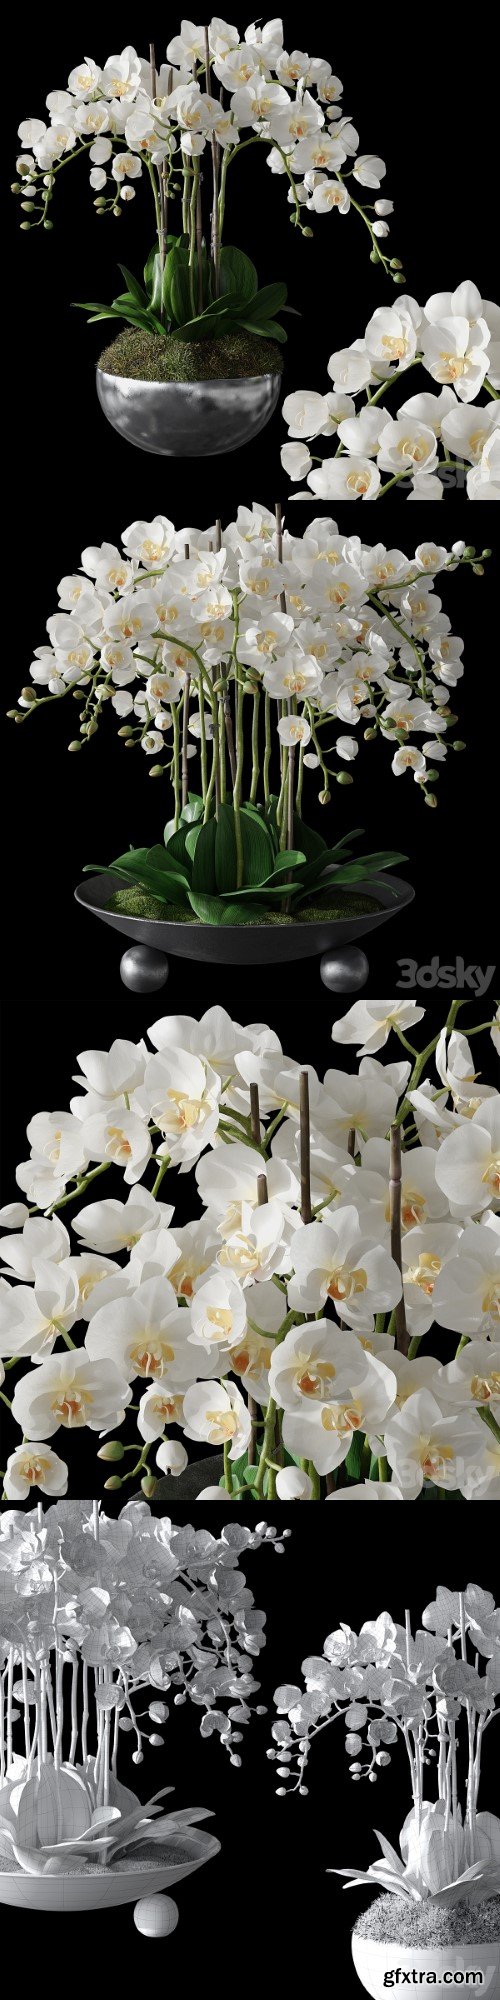 Orchids 1 | Vray